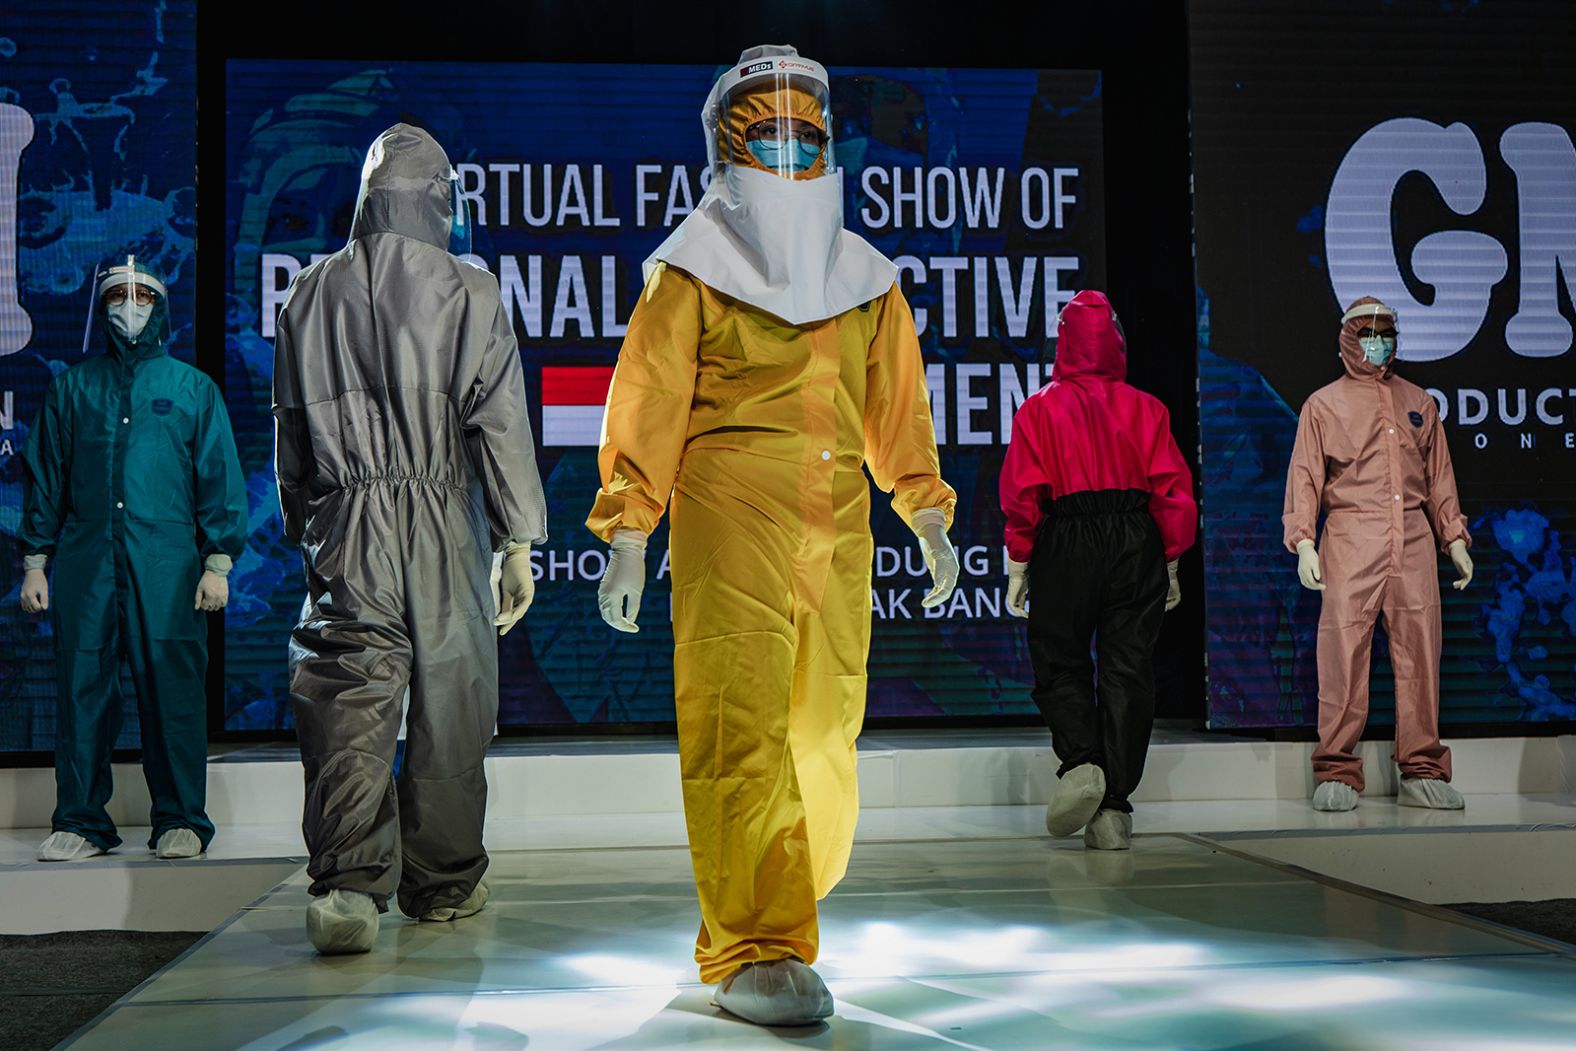 Medical workers in Yogyakarta, Indonesia, showcase designs during a fashion show of personal protective equipment on August 1. The fashion show was held as a form of gratitude for all medical personnel who have been fighting Covid-19.